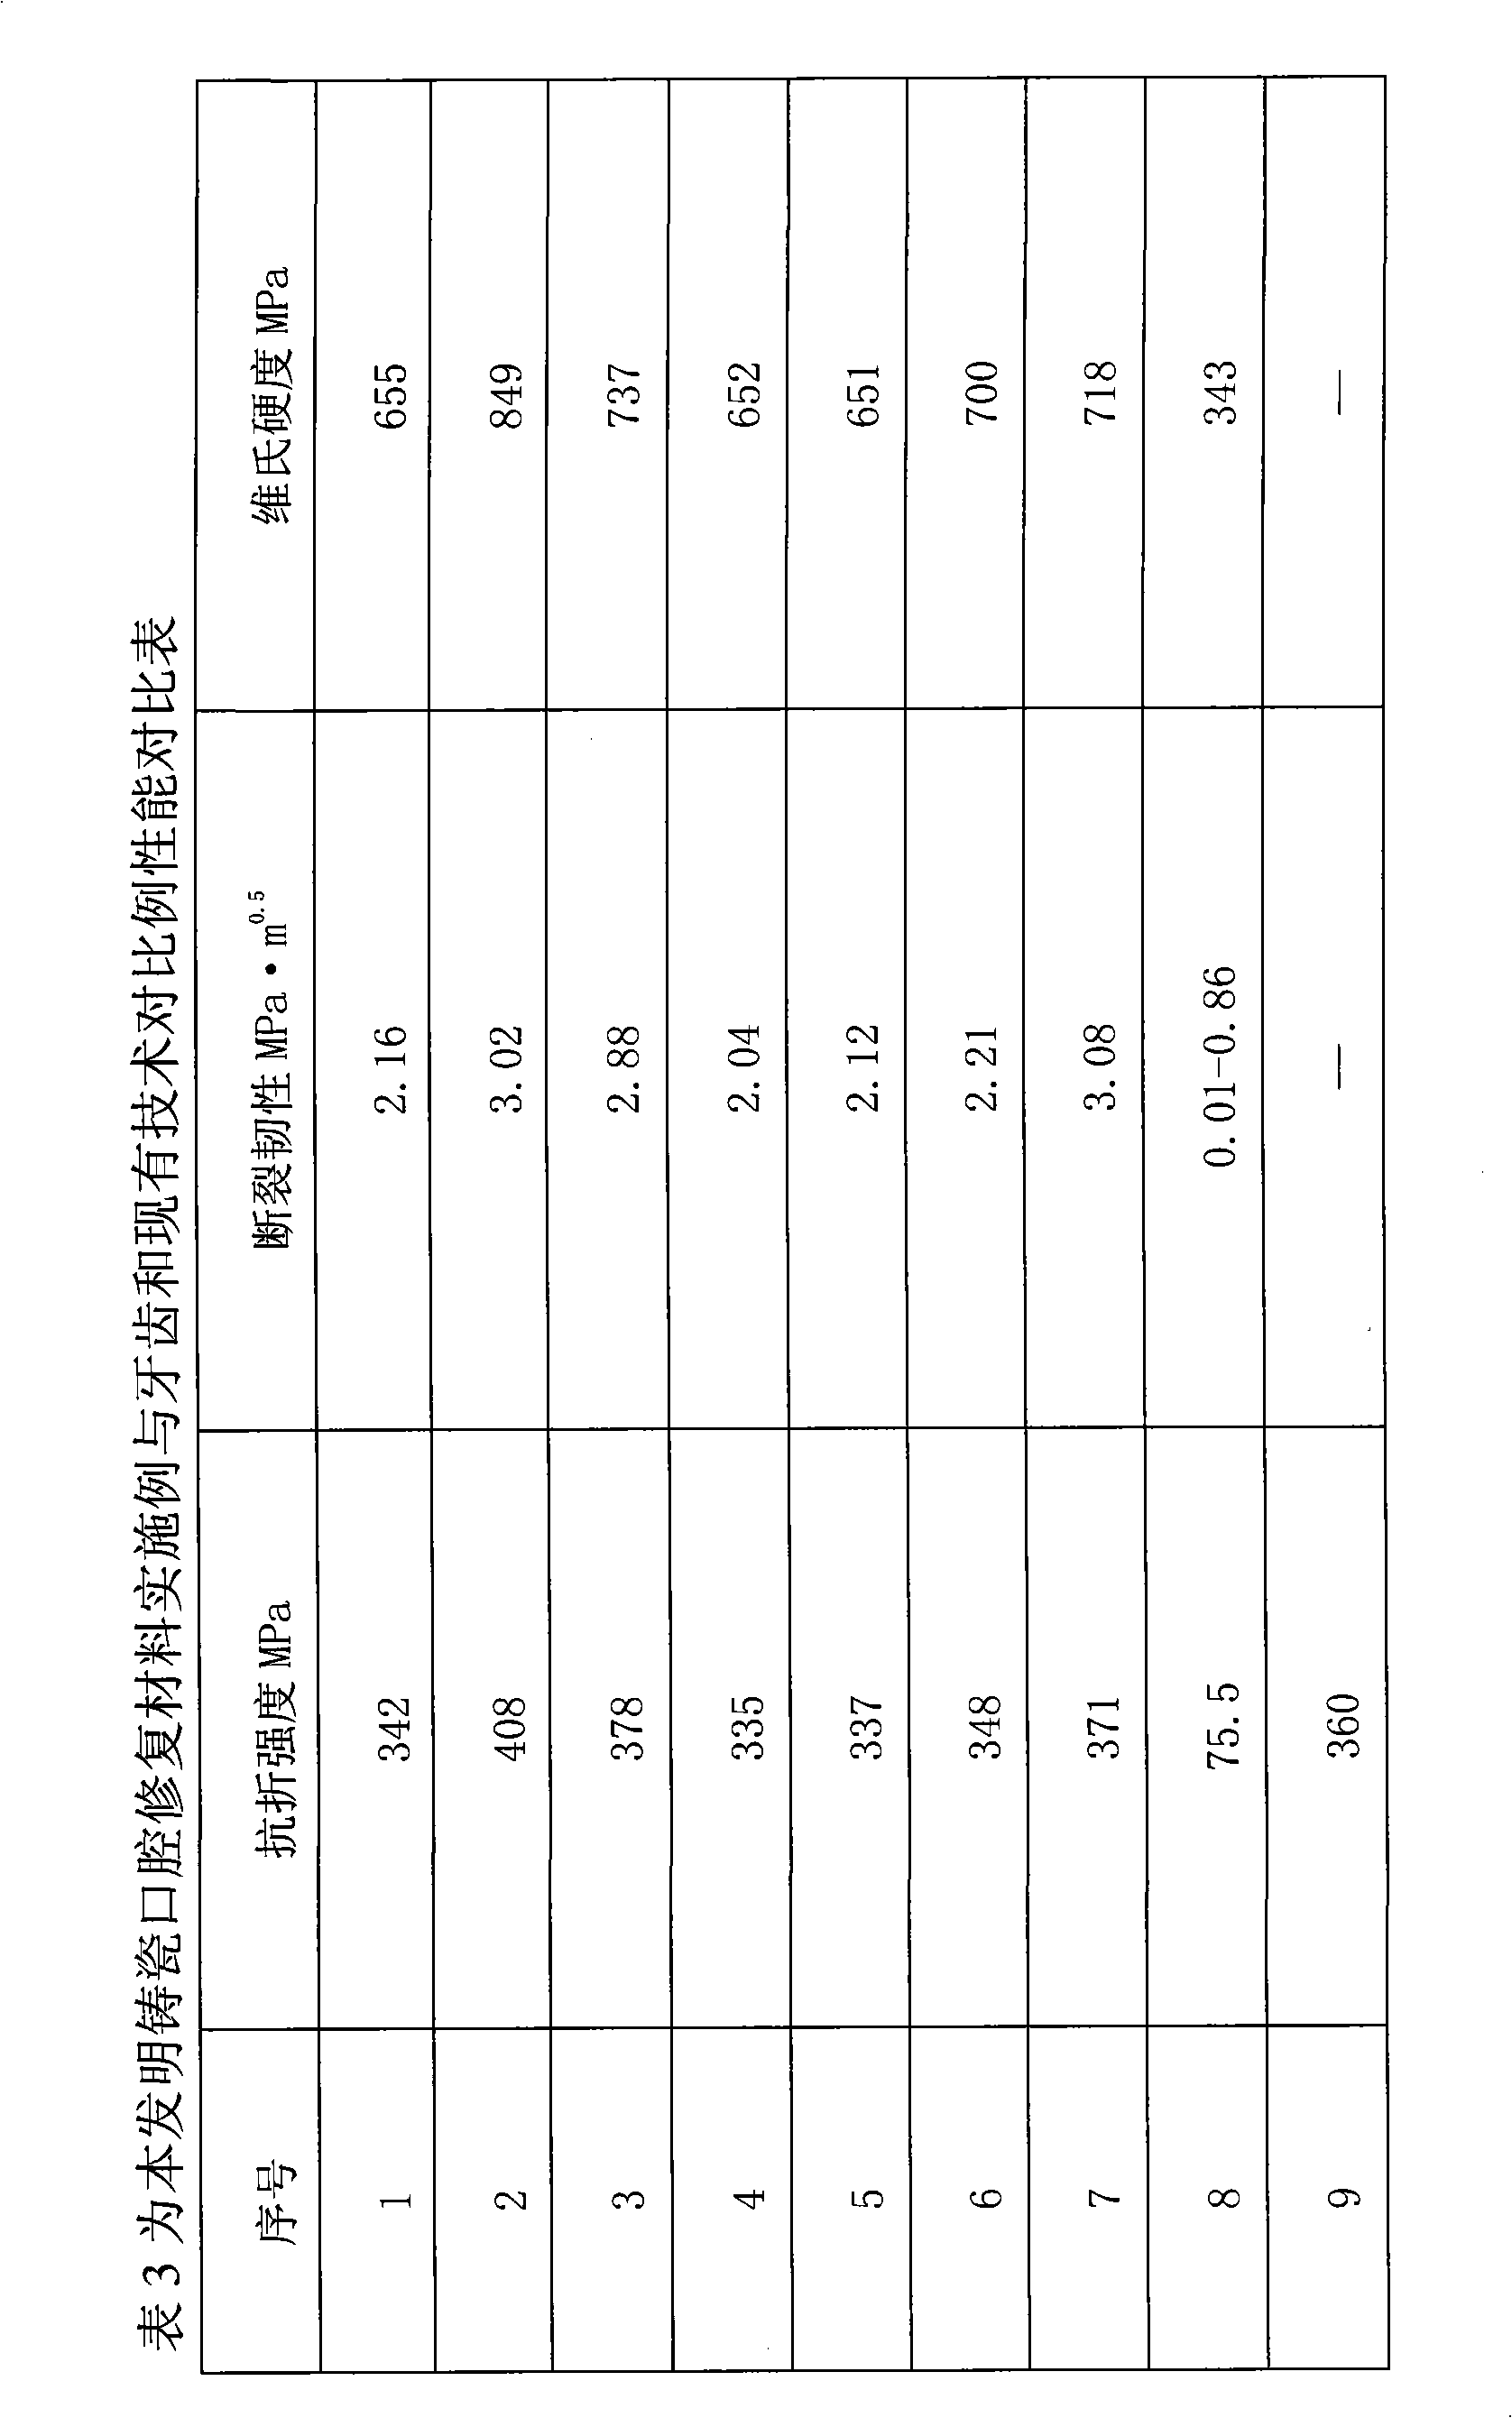 Material for repairing lithium-based ceramic oral cavity and preparation thereof